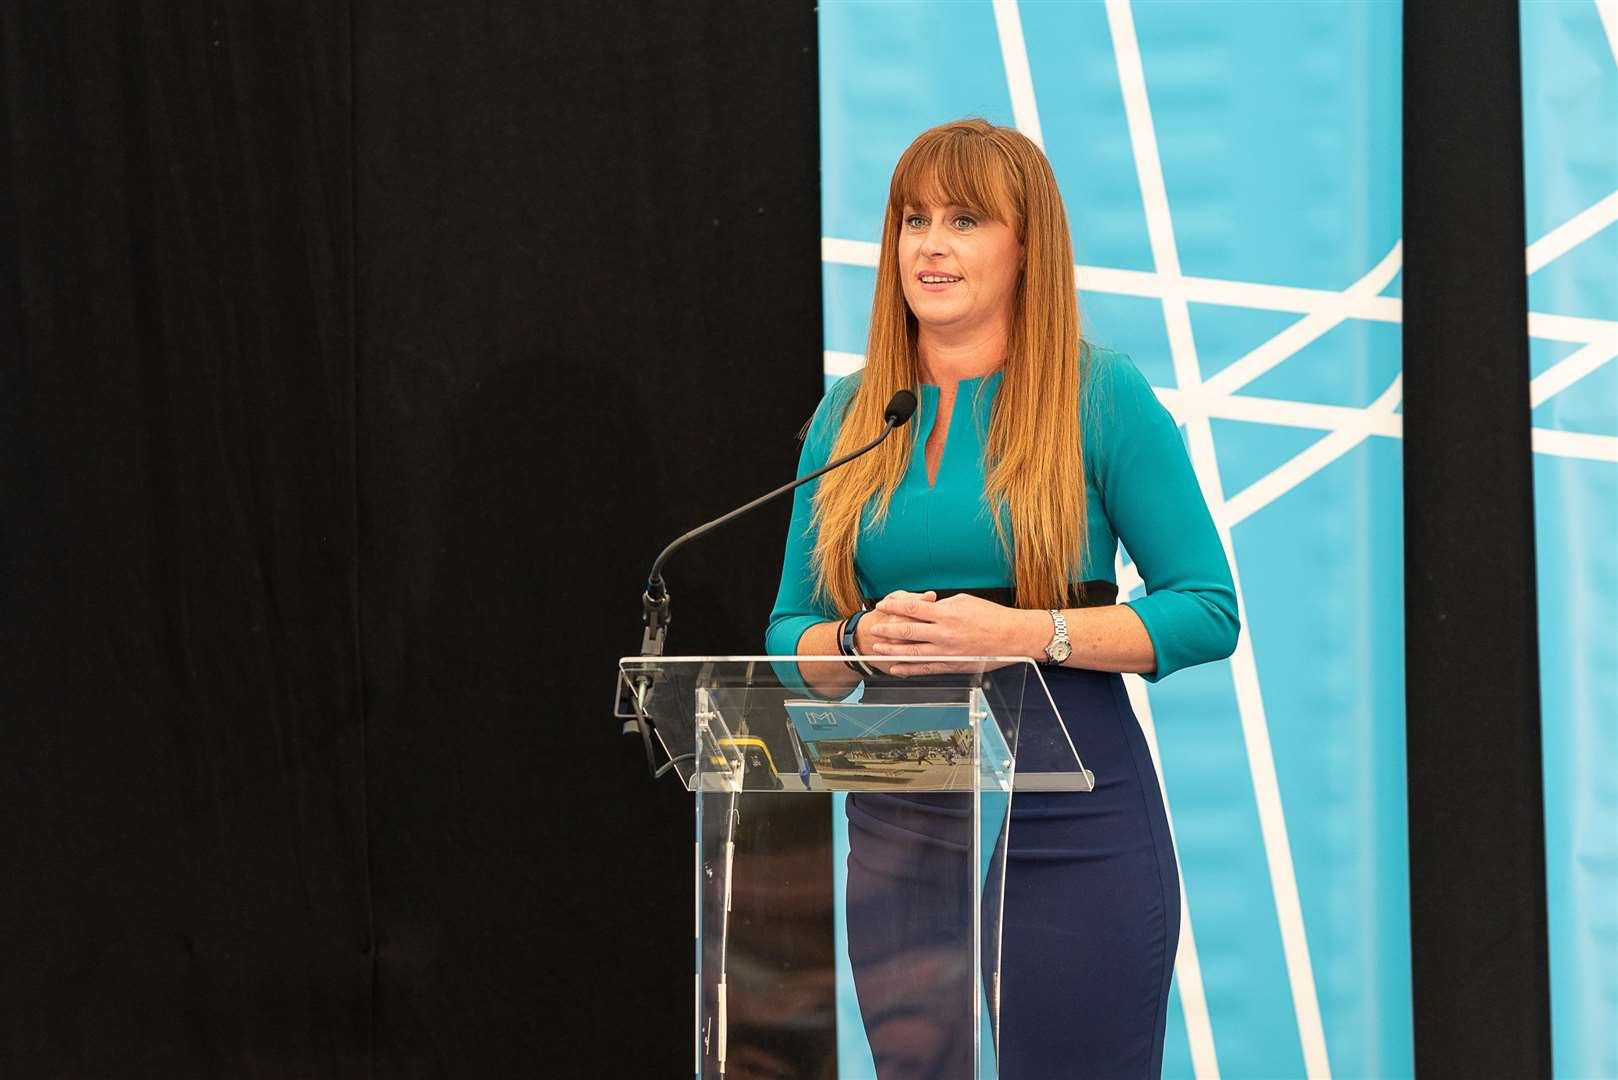 MP Kelly Tolhurst, minister for small business, will be at the event at the University of Kent